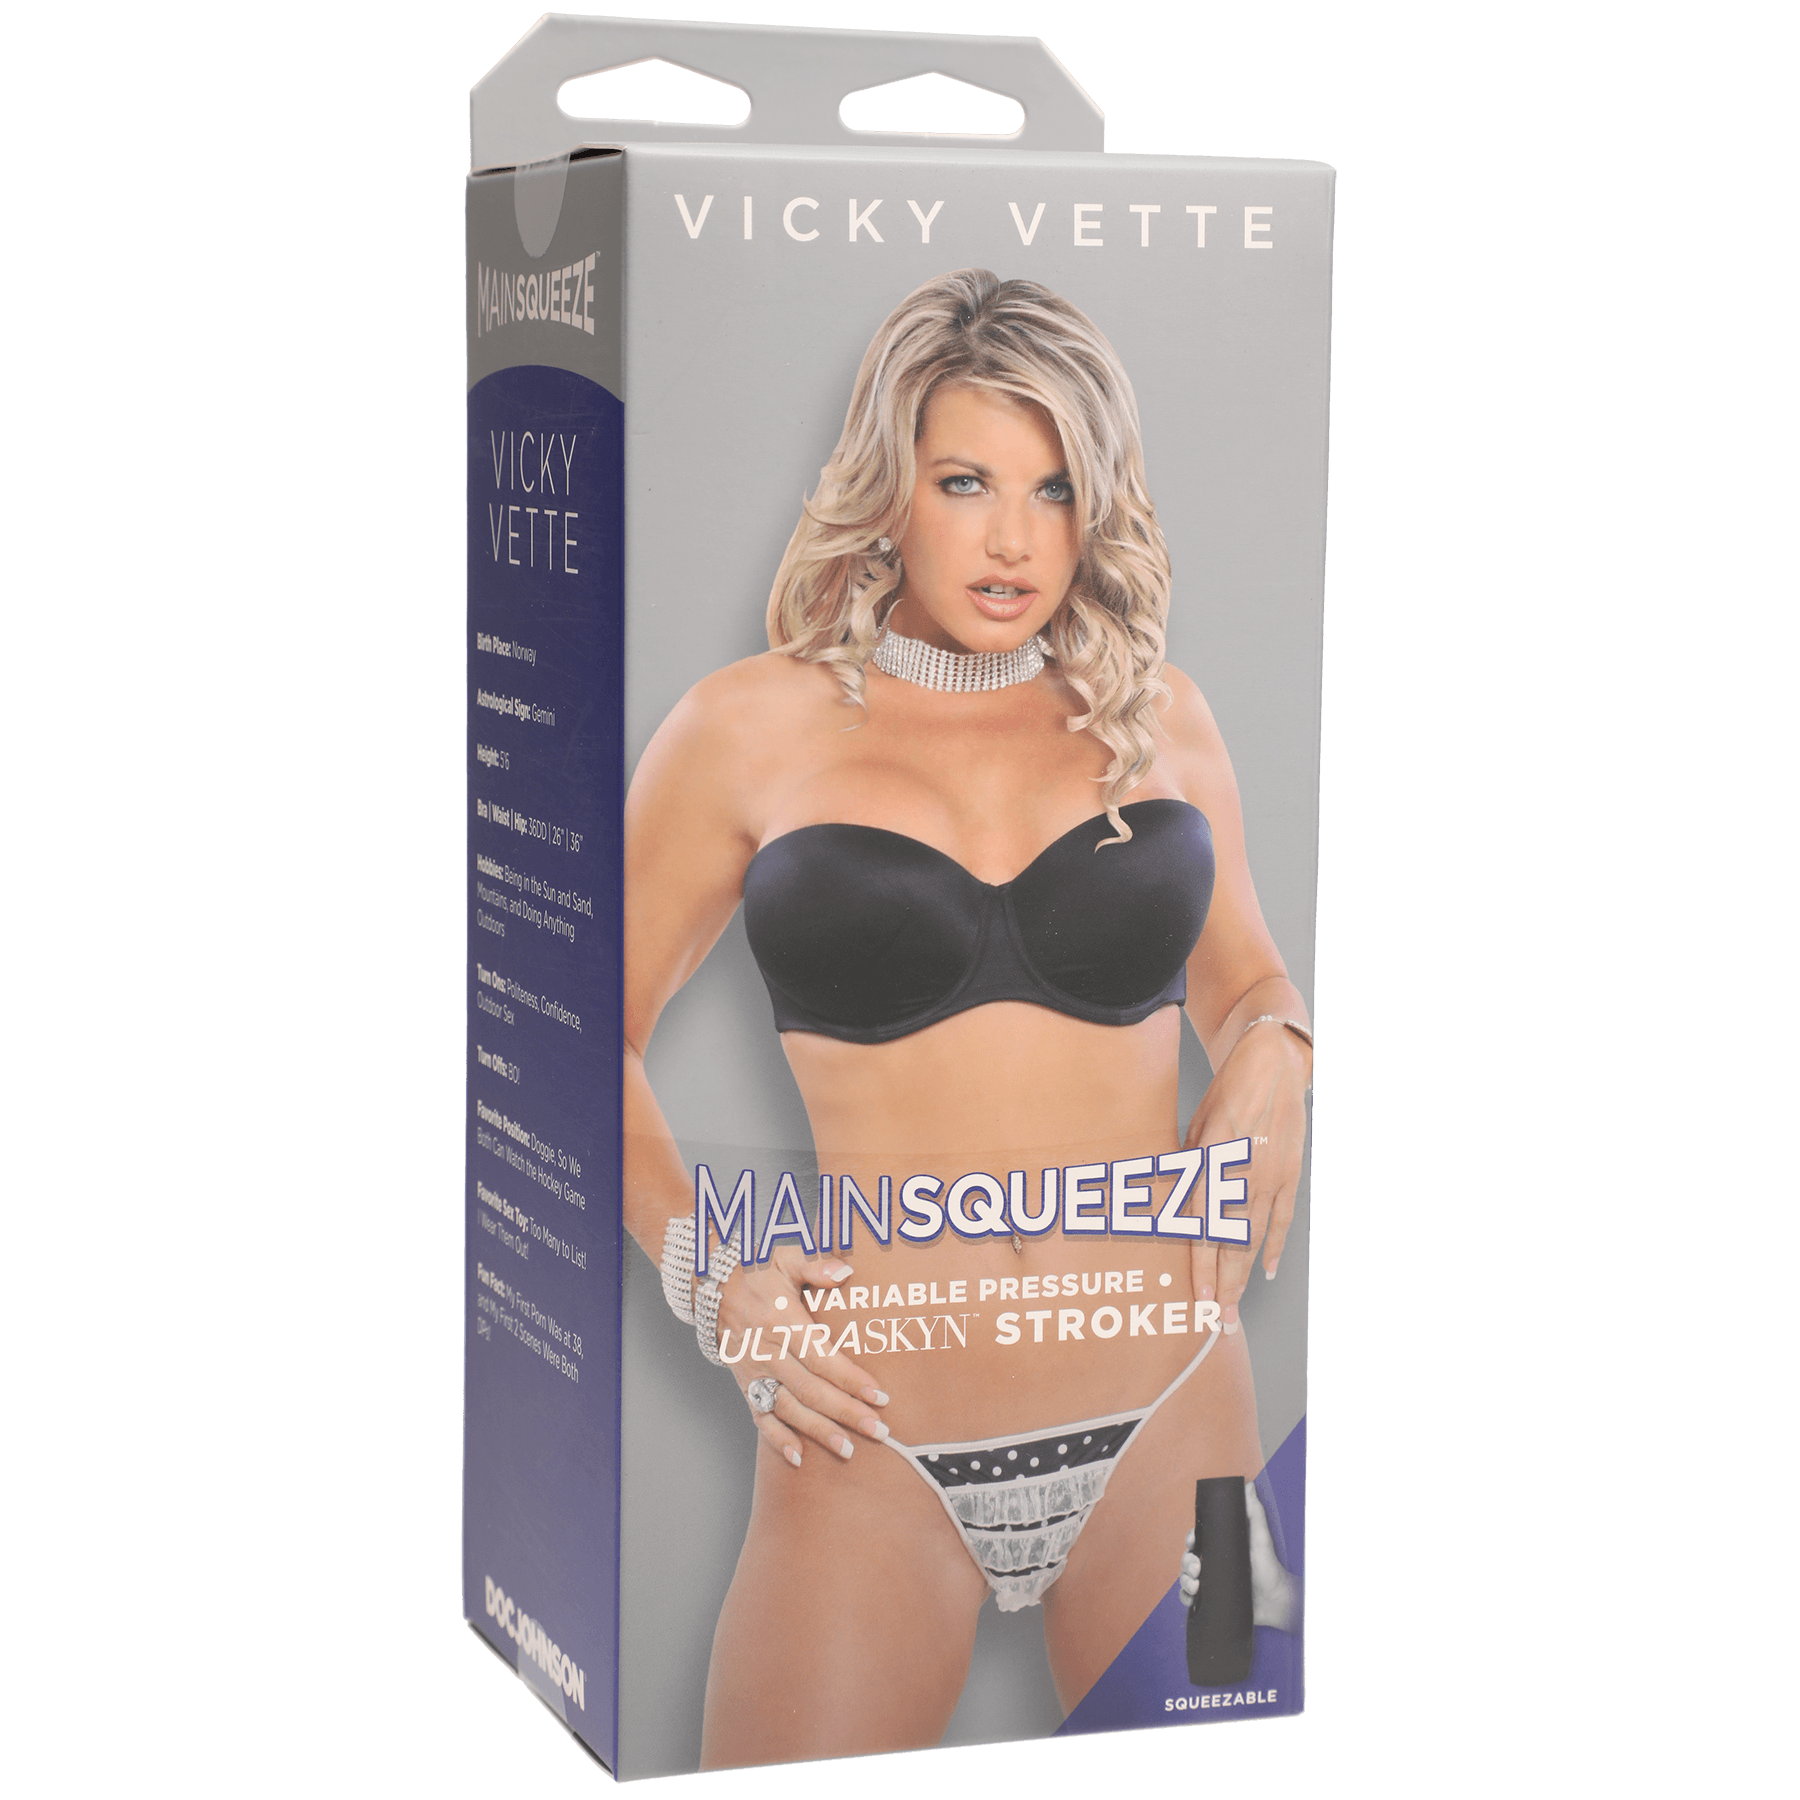 Doc Johnson Main Squeeze Vicky Vette Ultraskyn - Buy At Luxury Toy X - Free 3-Day Shipping